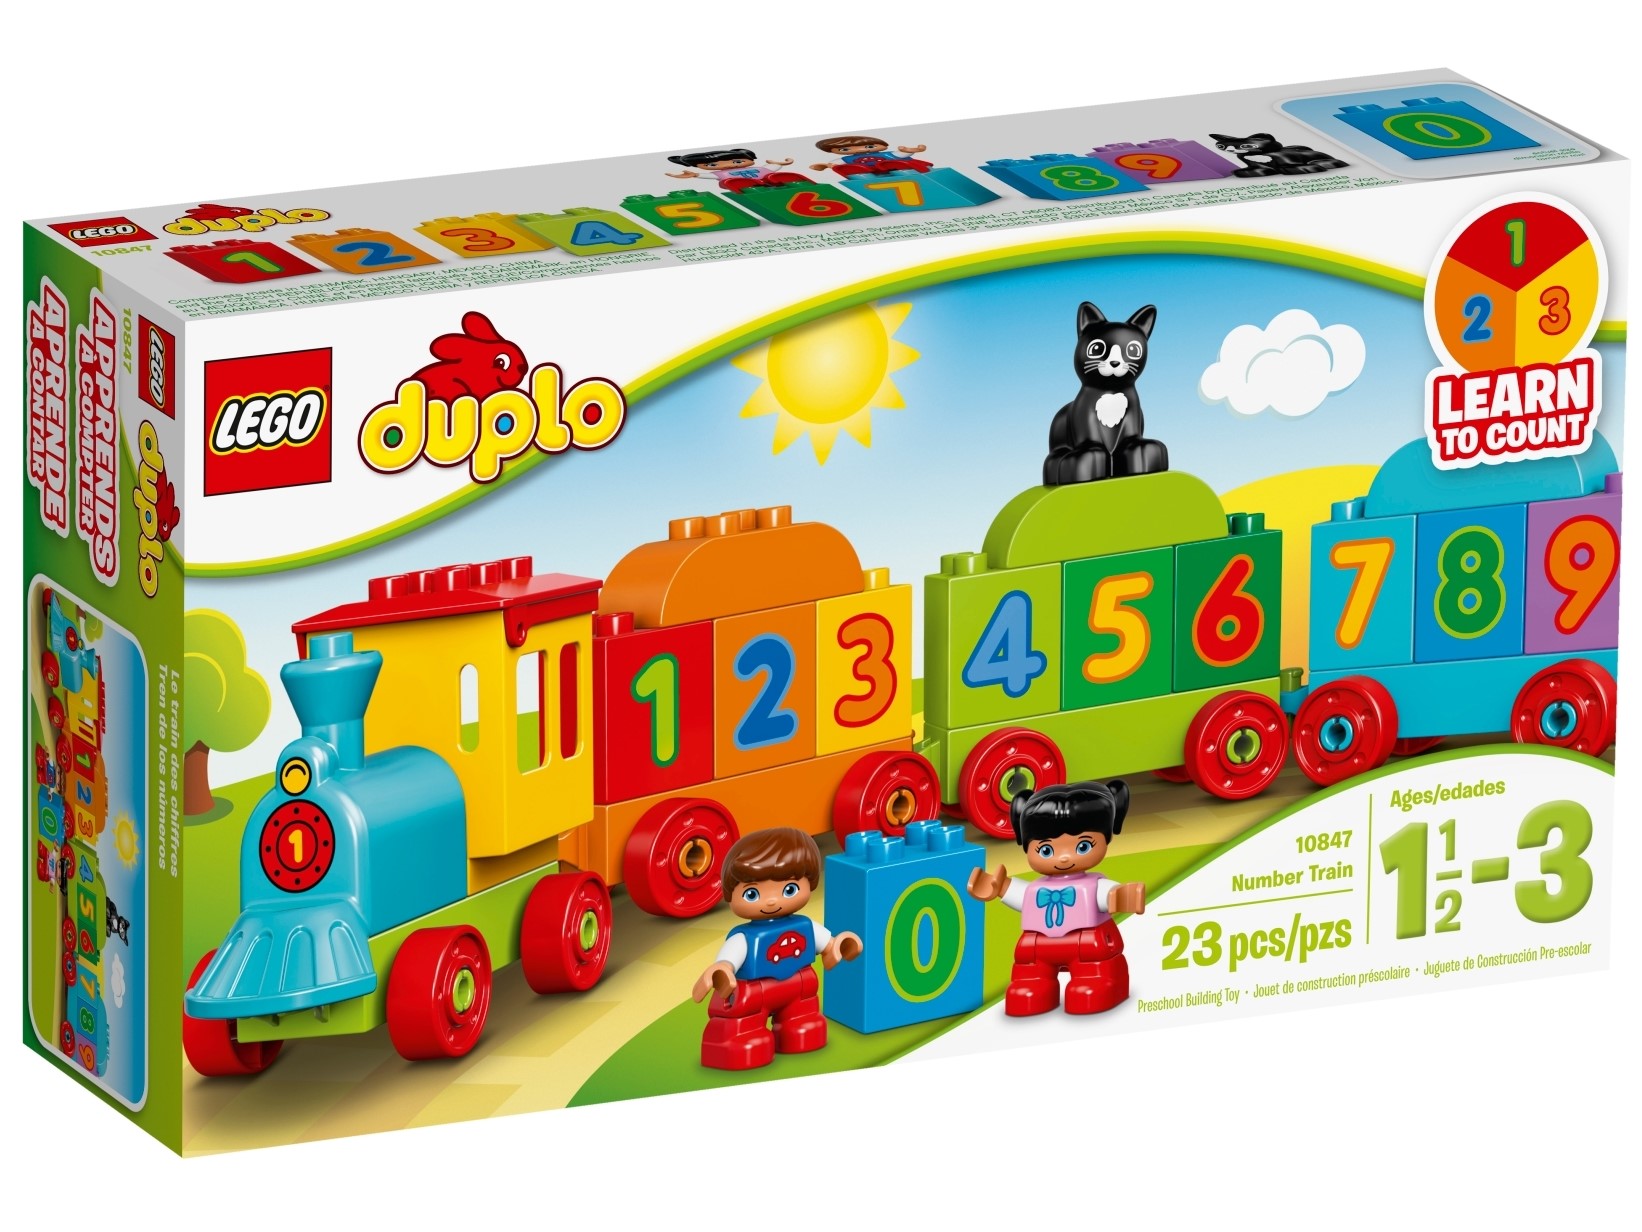 LEGO 10847 Duplo My First Number Train Toy with Number Decorated Bricks Earl...